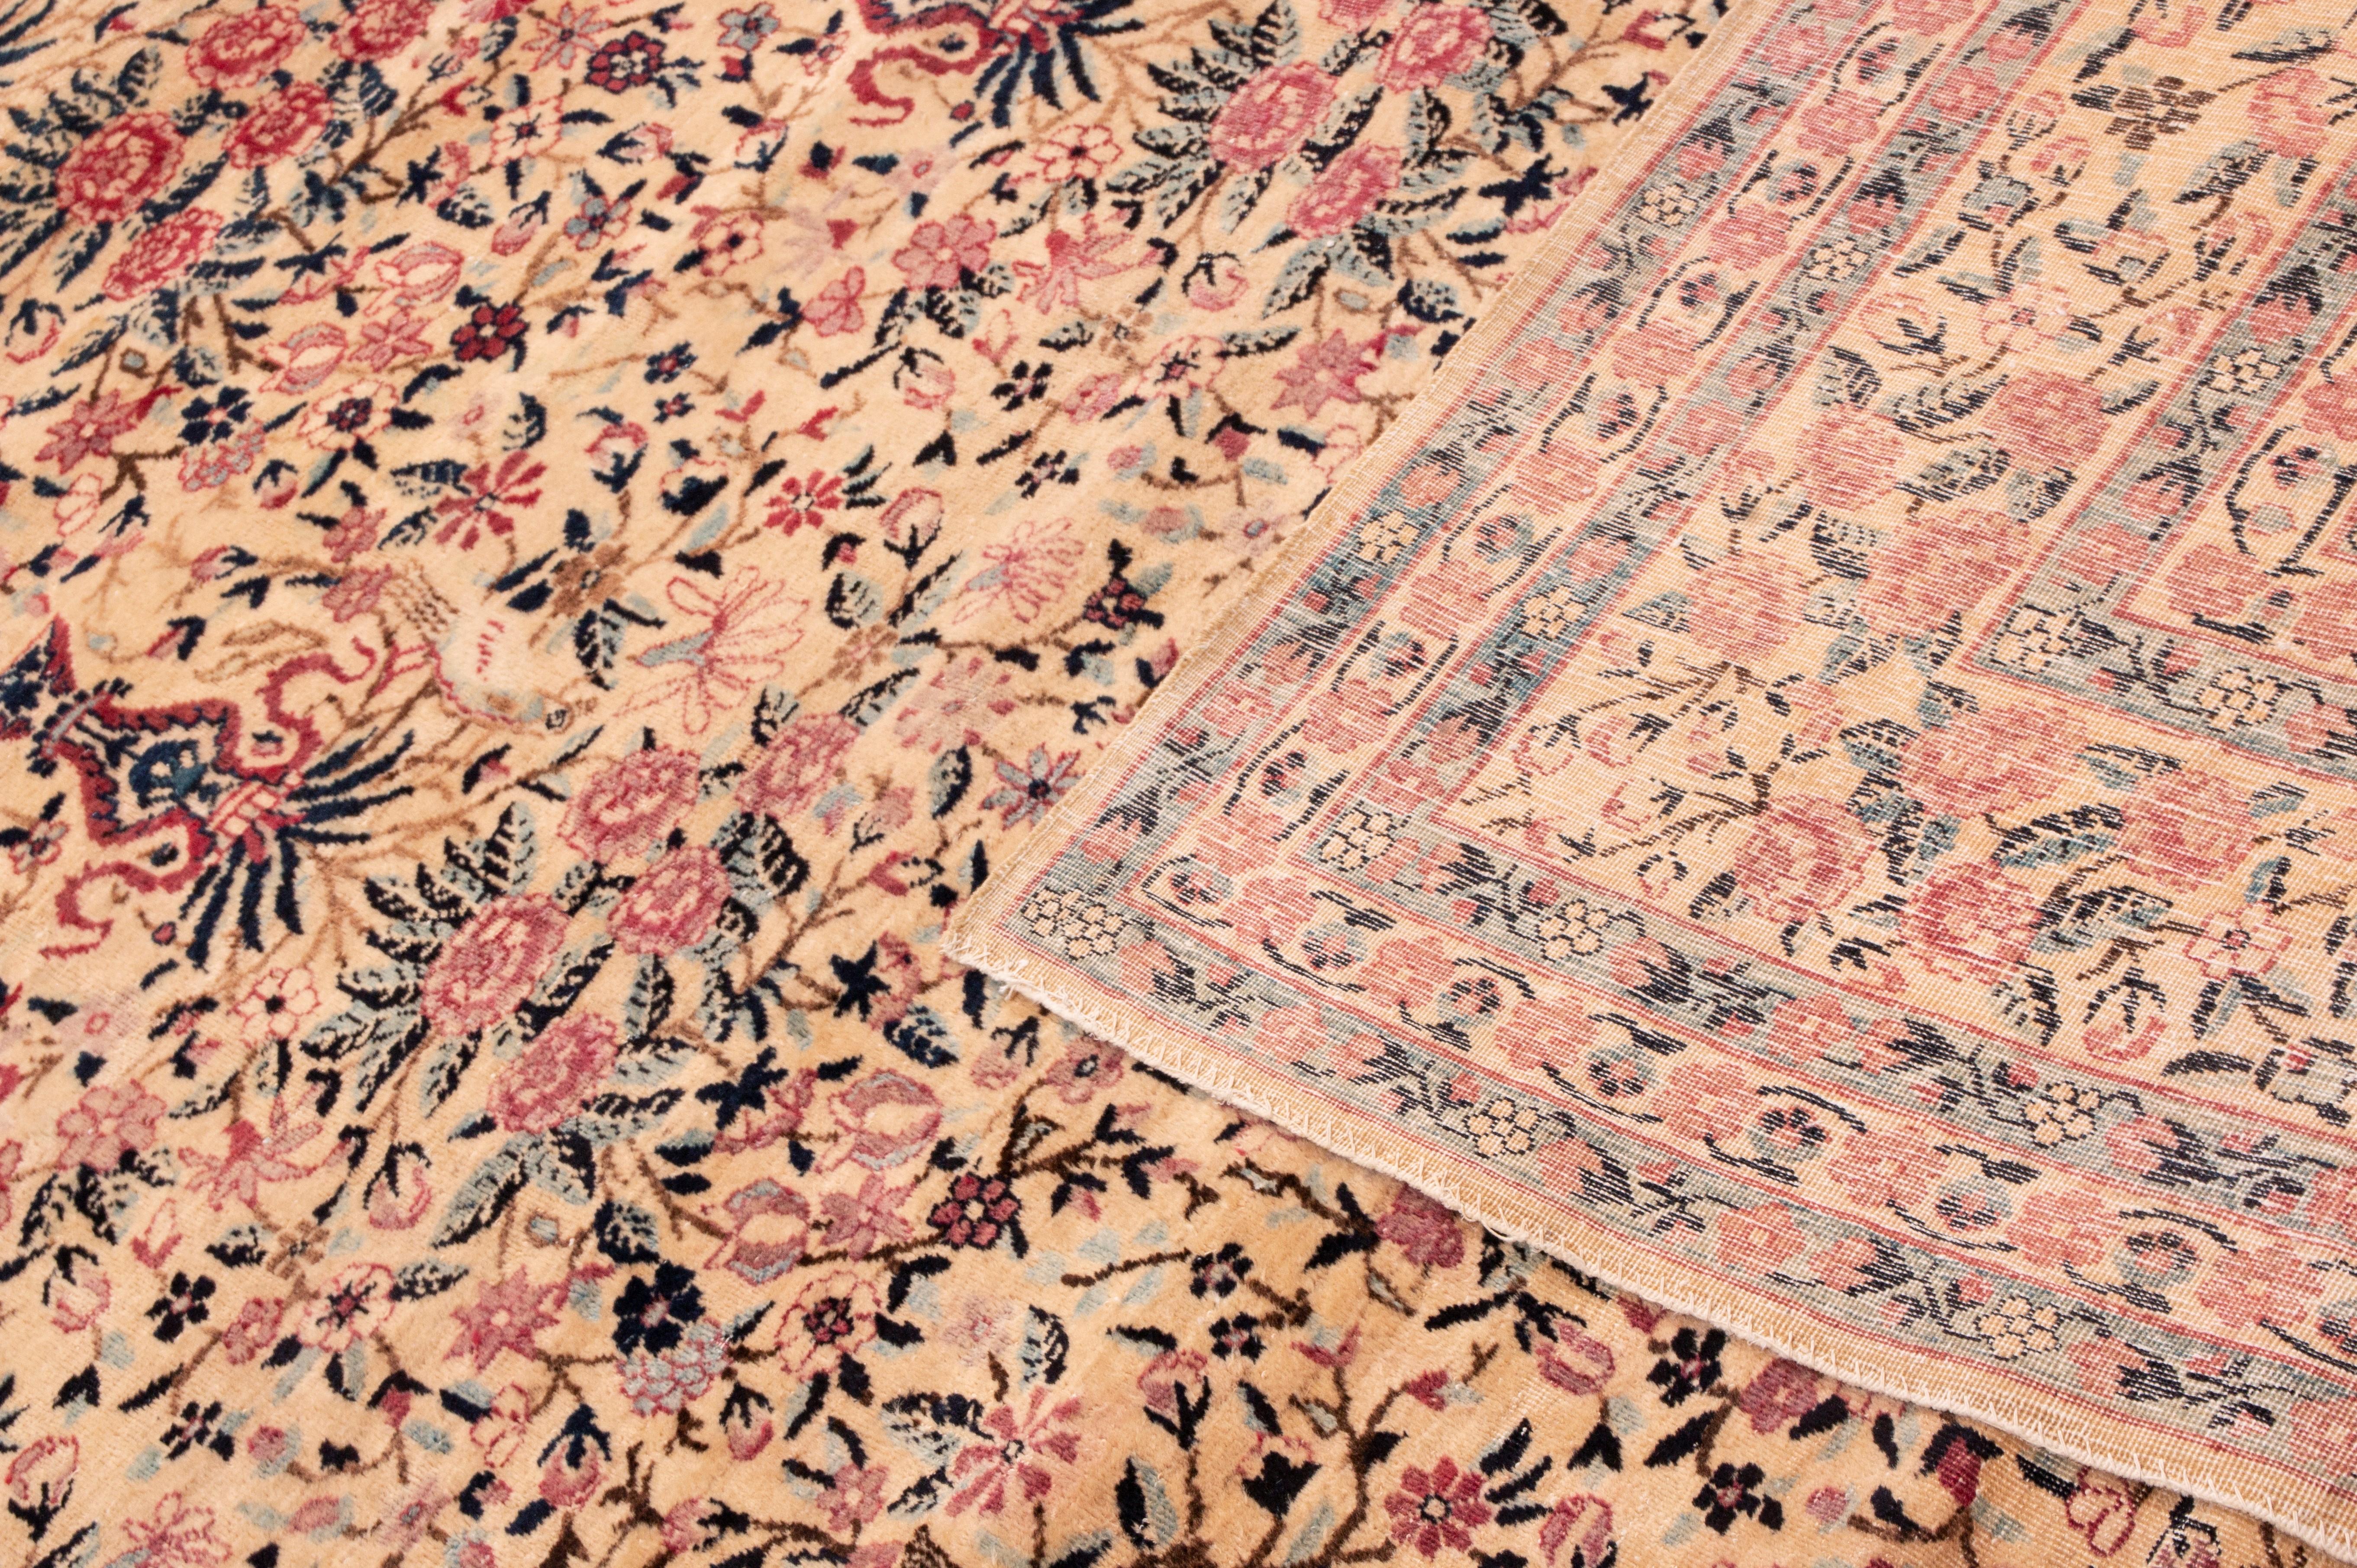 Antique Kerman Lavar Purple Red Wool Rug All-Over Floral Pattern In Fair Condition For Sale In Long Island City, NY